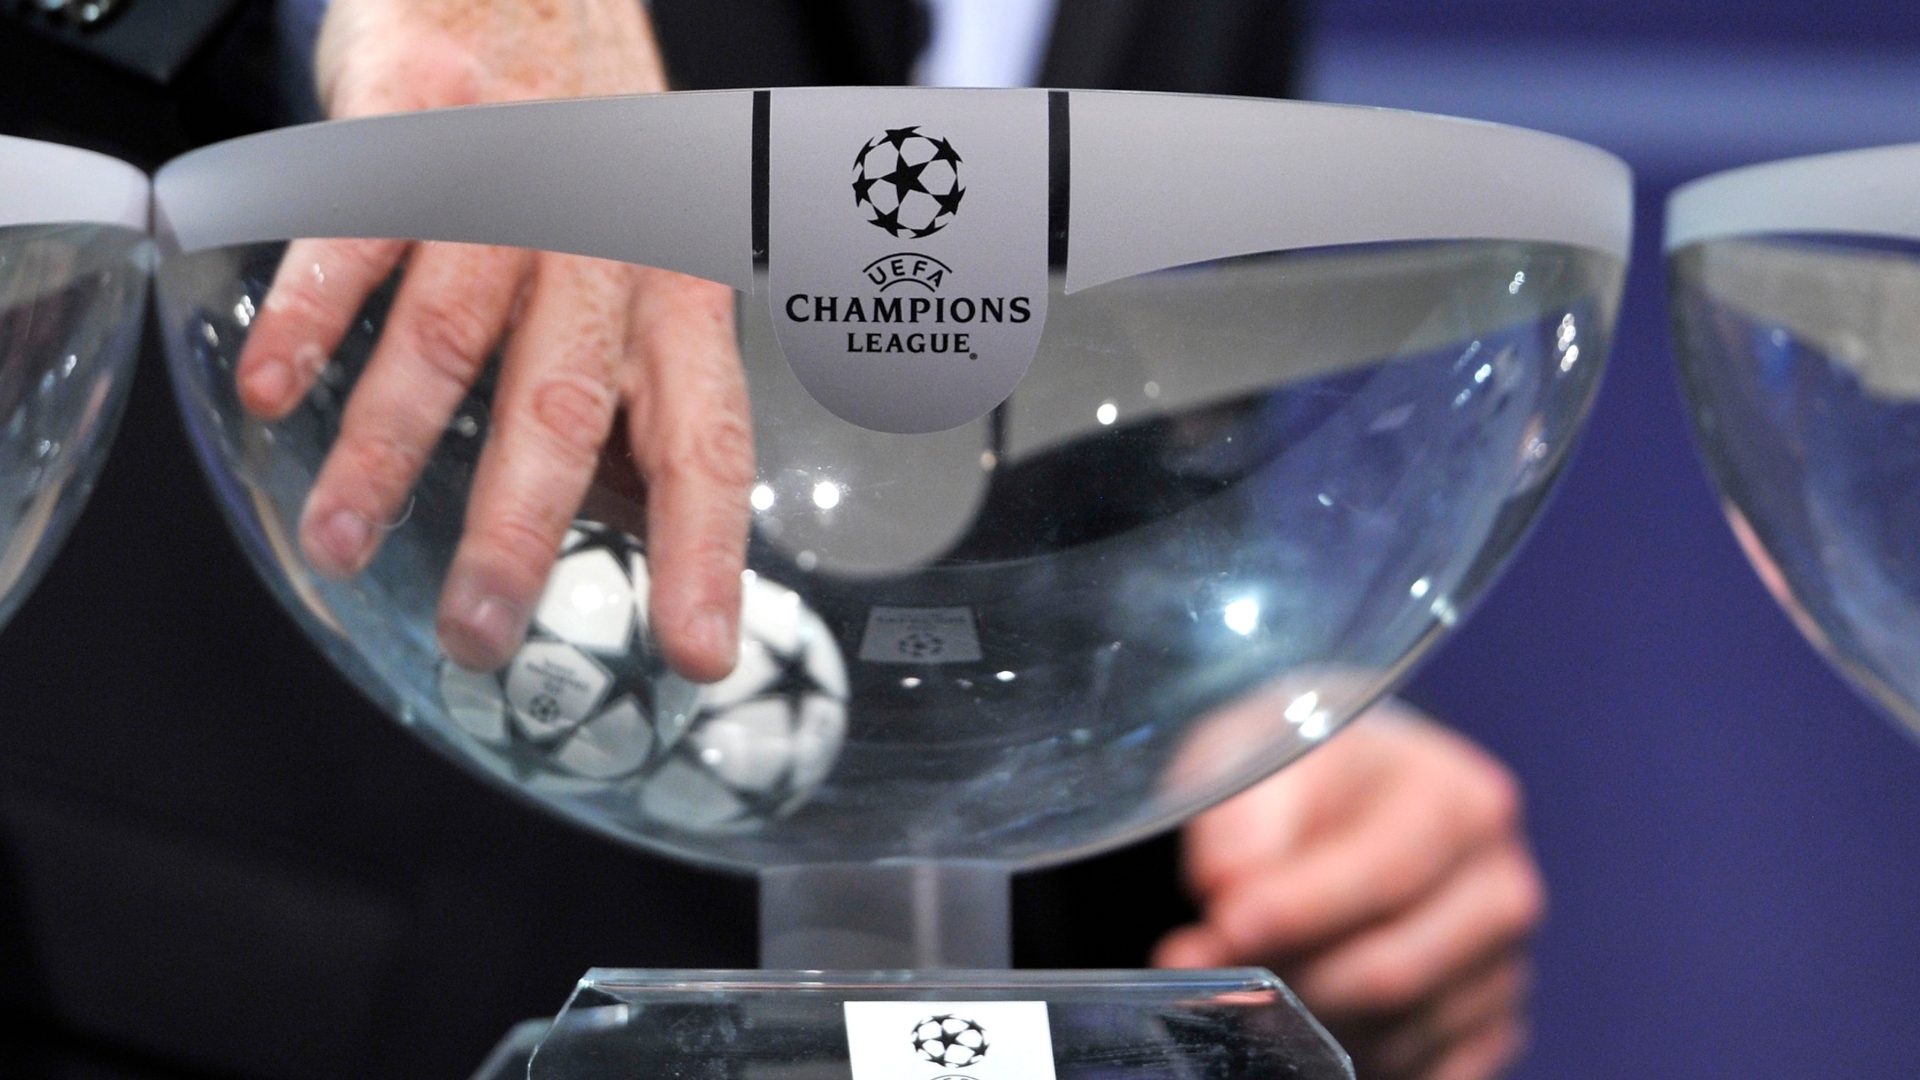 How did UEFA botch the UCL draw? - Stream the Video